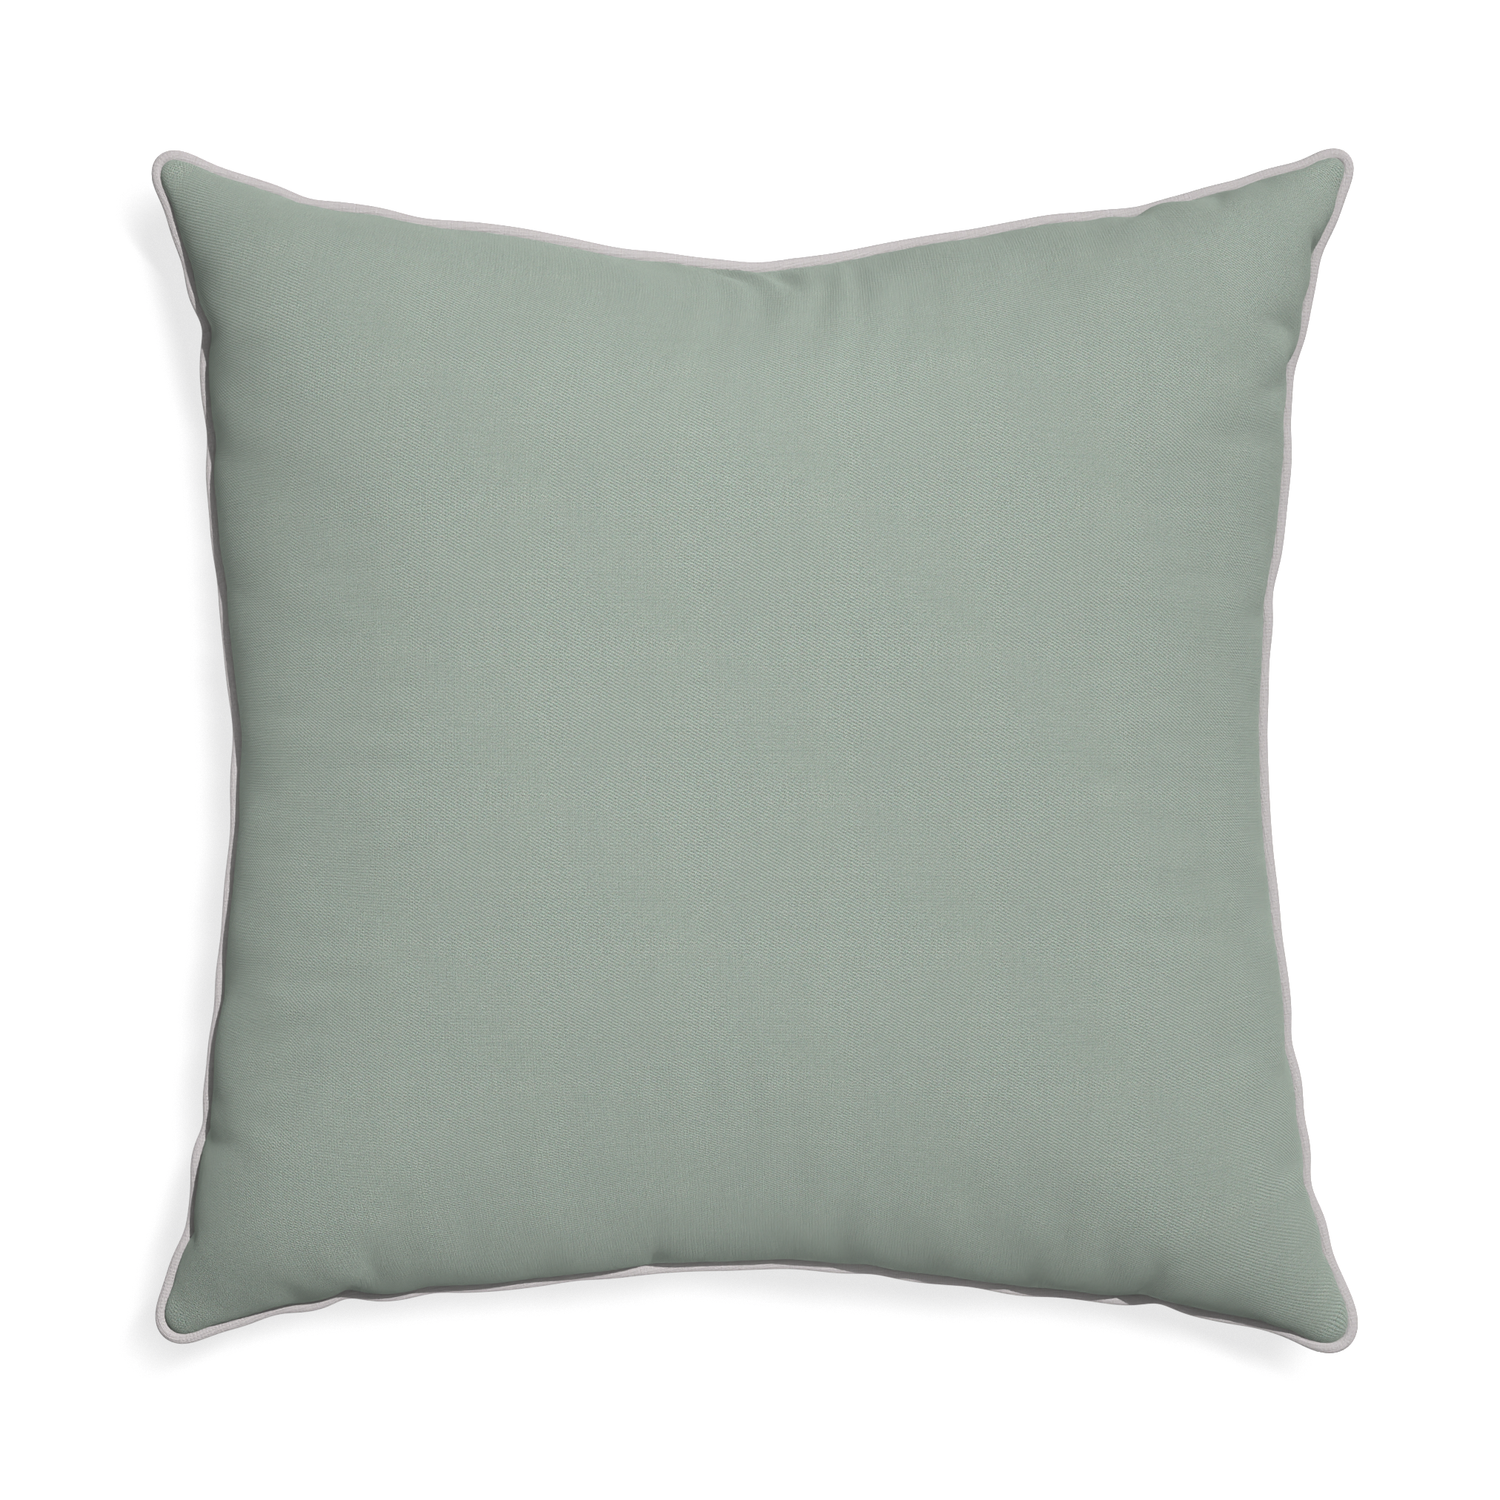 Euro-sham sage custom pillow with pebble piping on white background